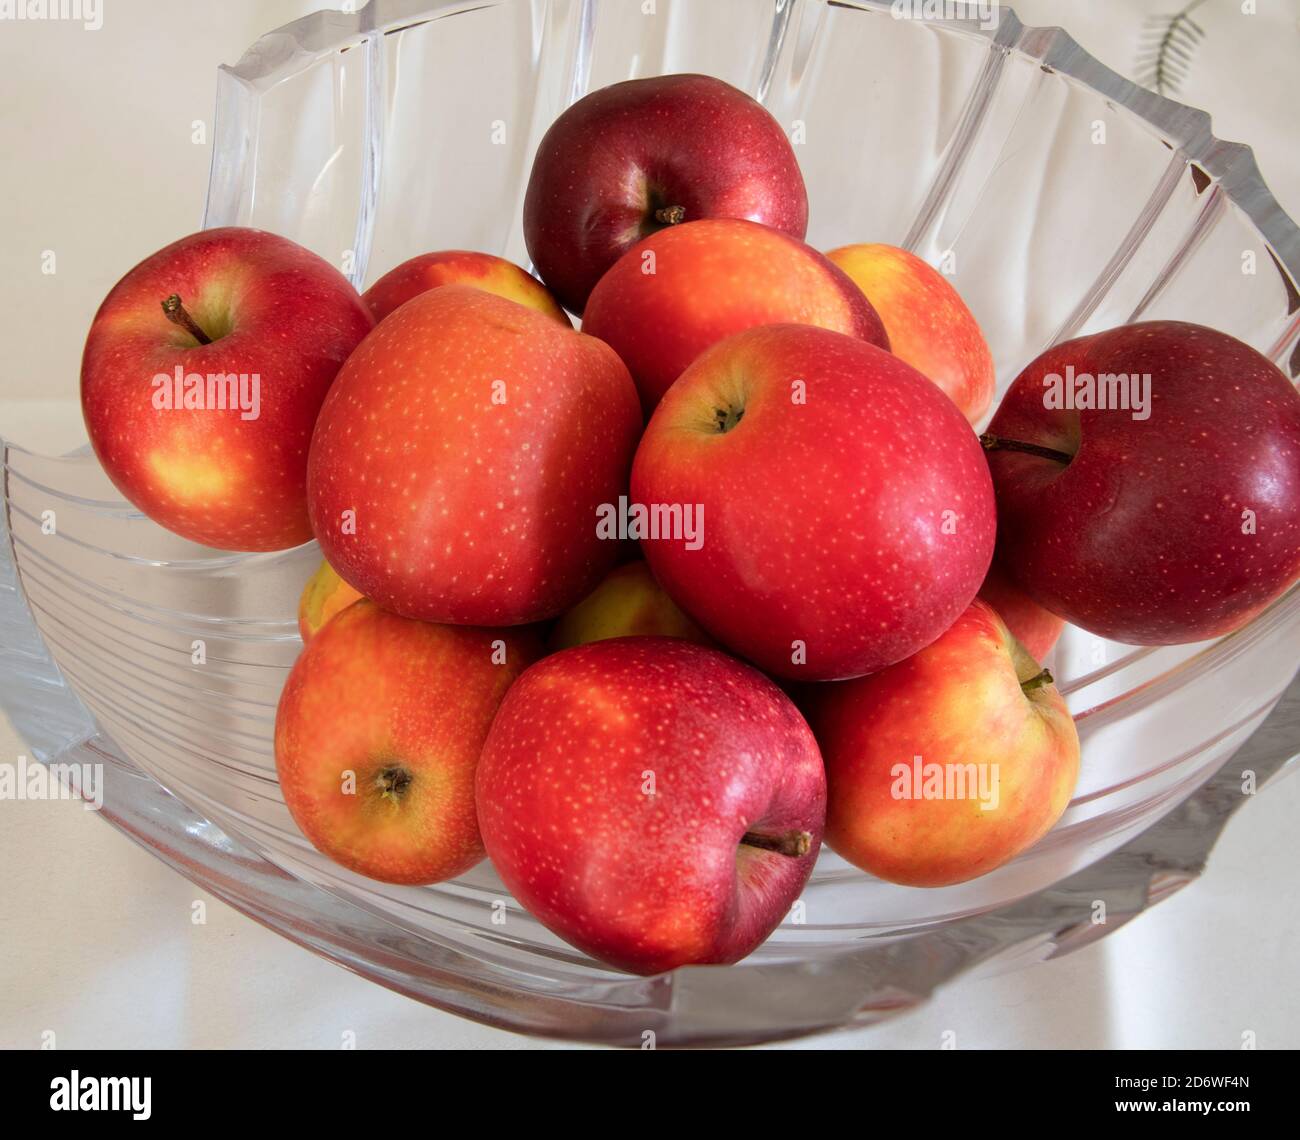 A Red Apples in a crystal vase Stock Photo